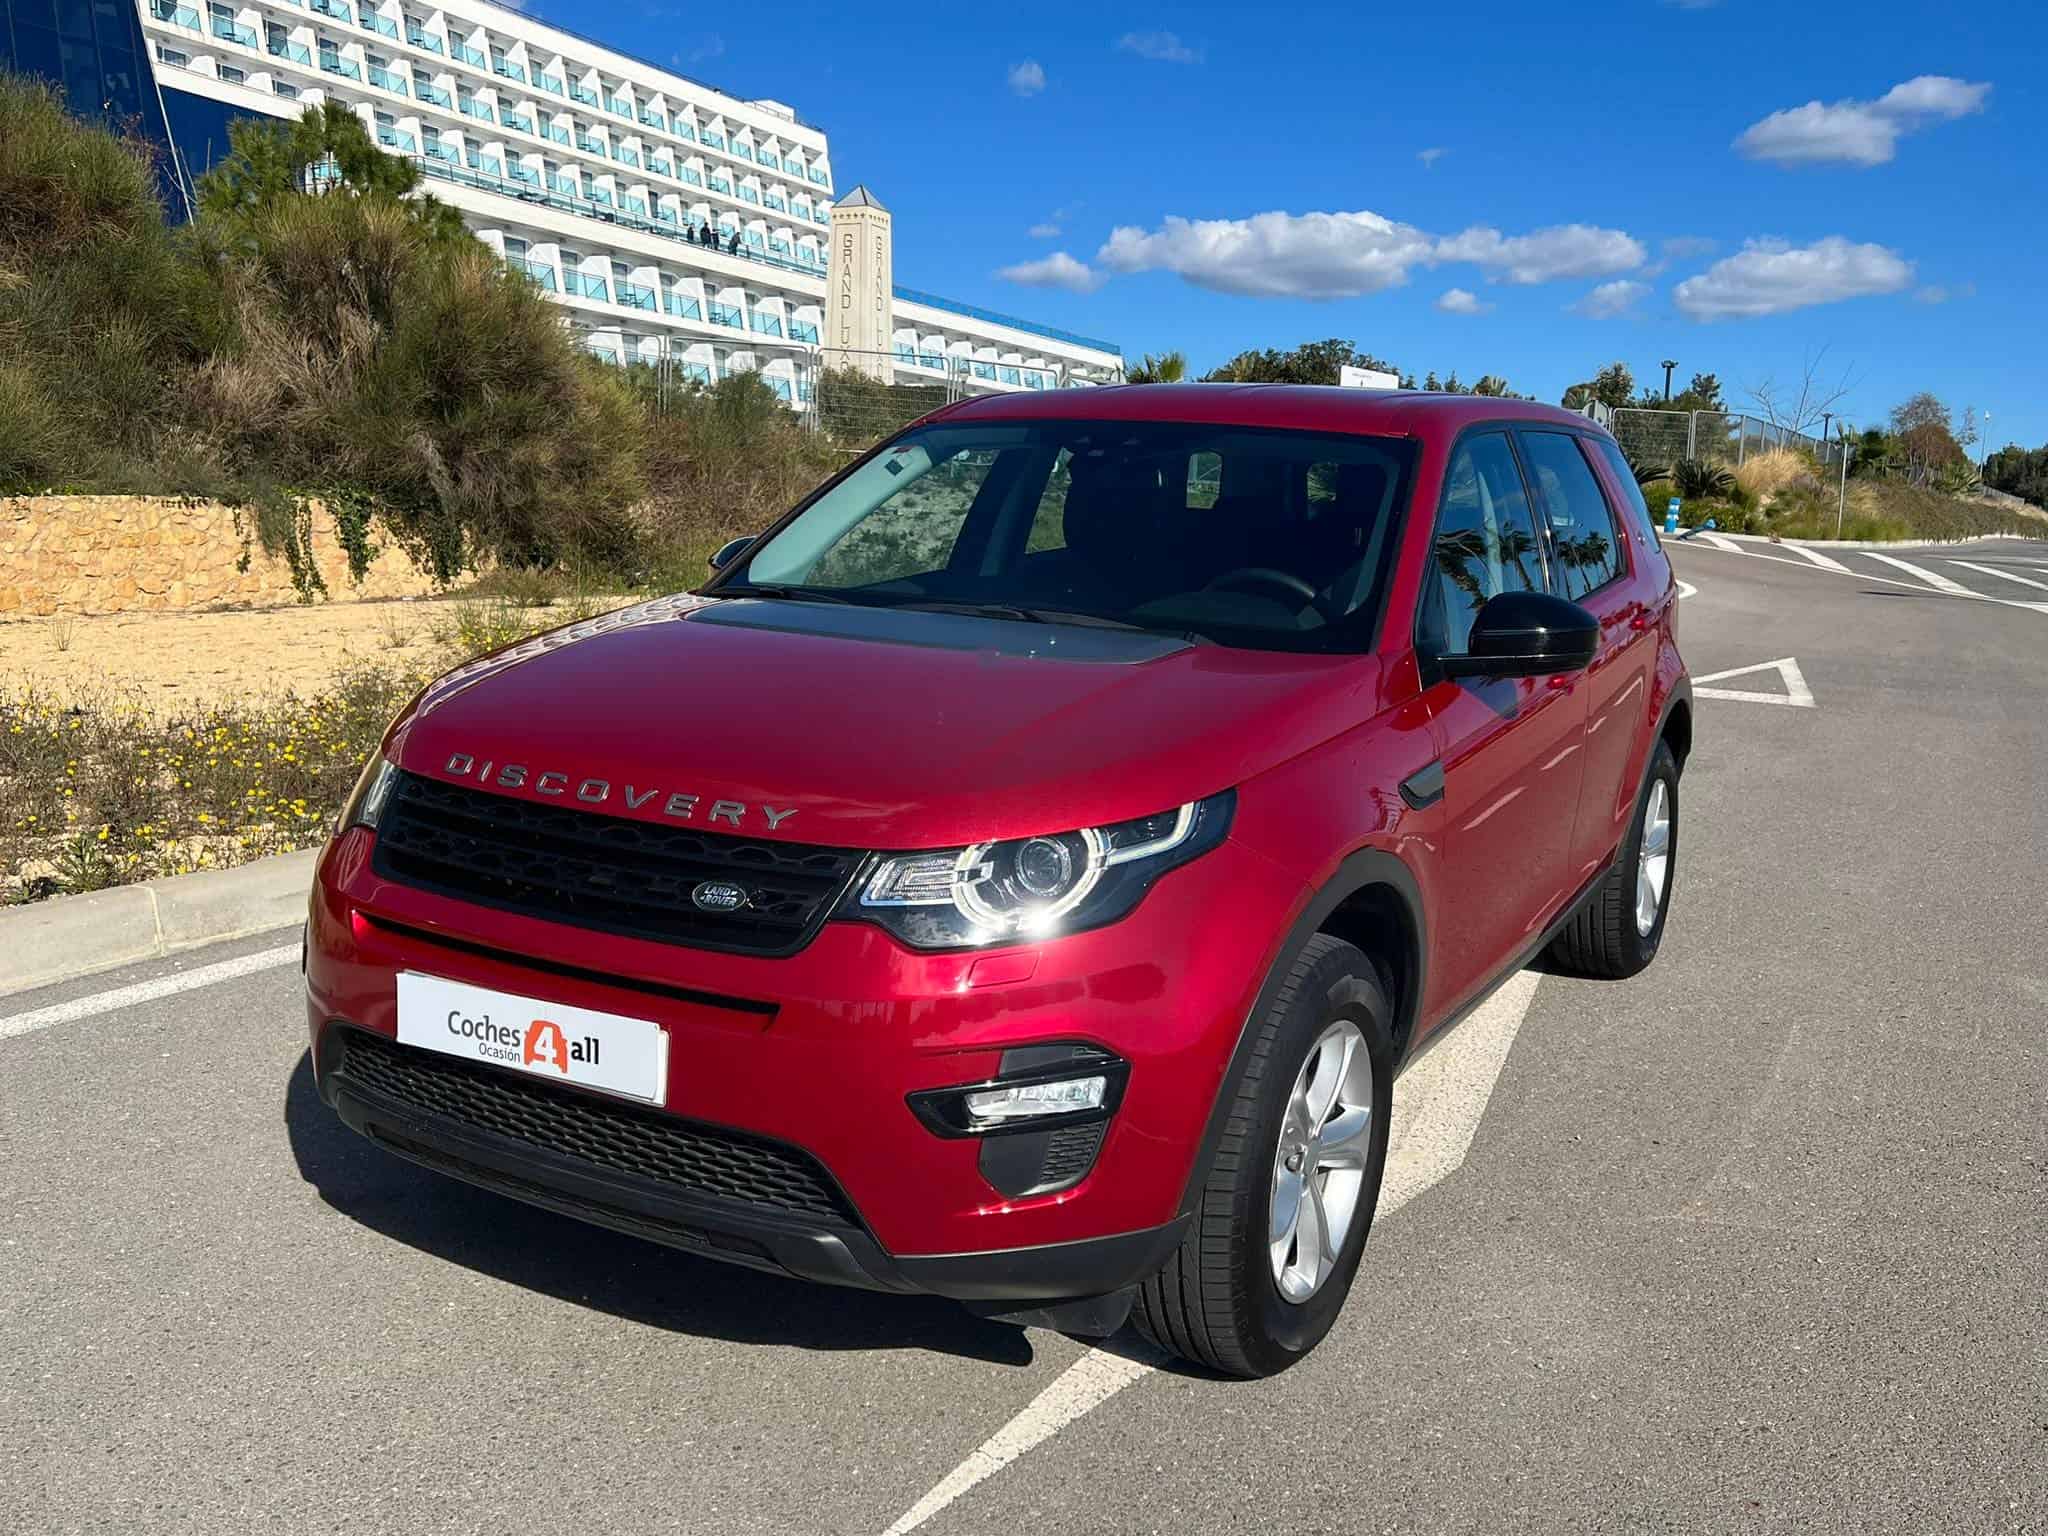 LAND ROVER DISCOVERY SPORT 2.0L TD4 150HP PURE 7 SEATS 4×4